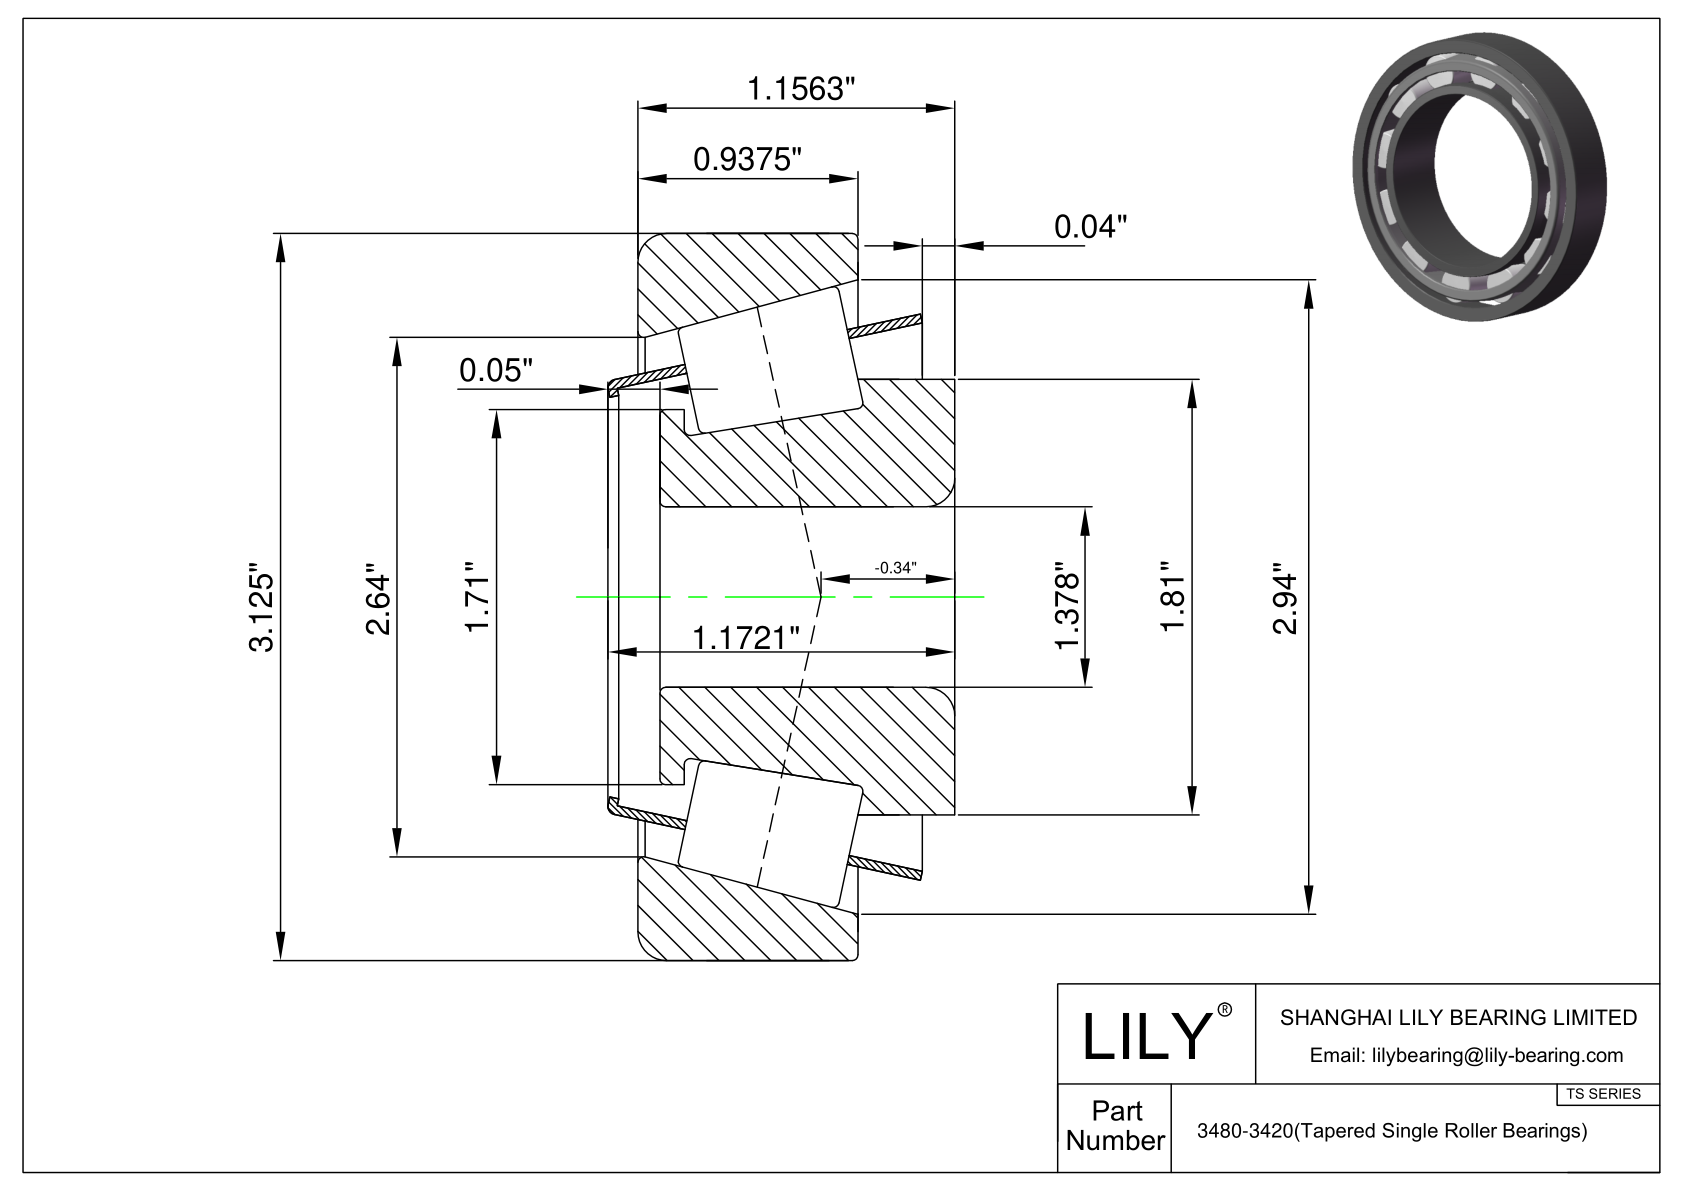 3480-3420 TS (Tapered Single Roller Bearings) (Imperial) cad drawing